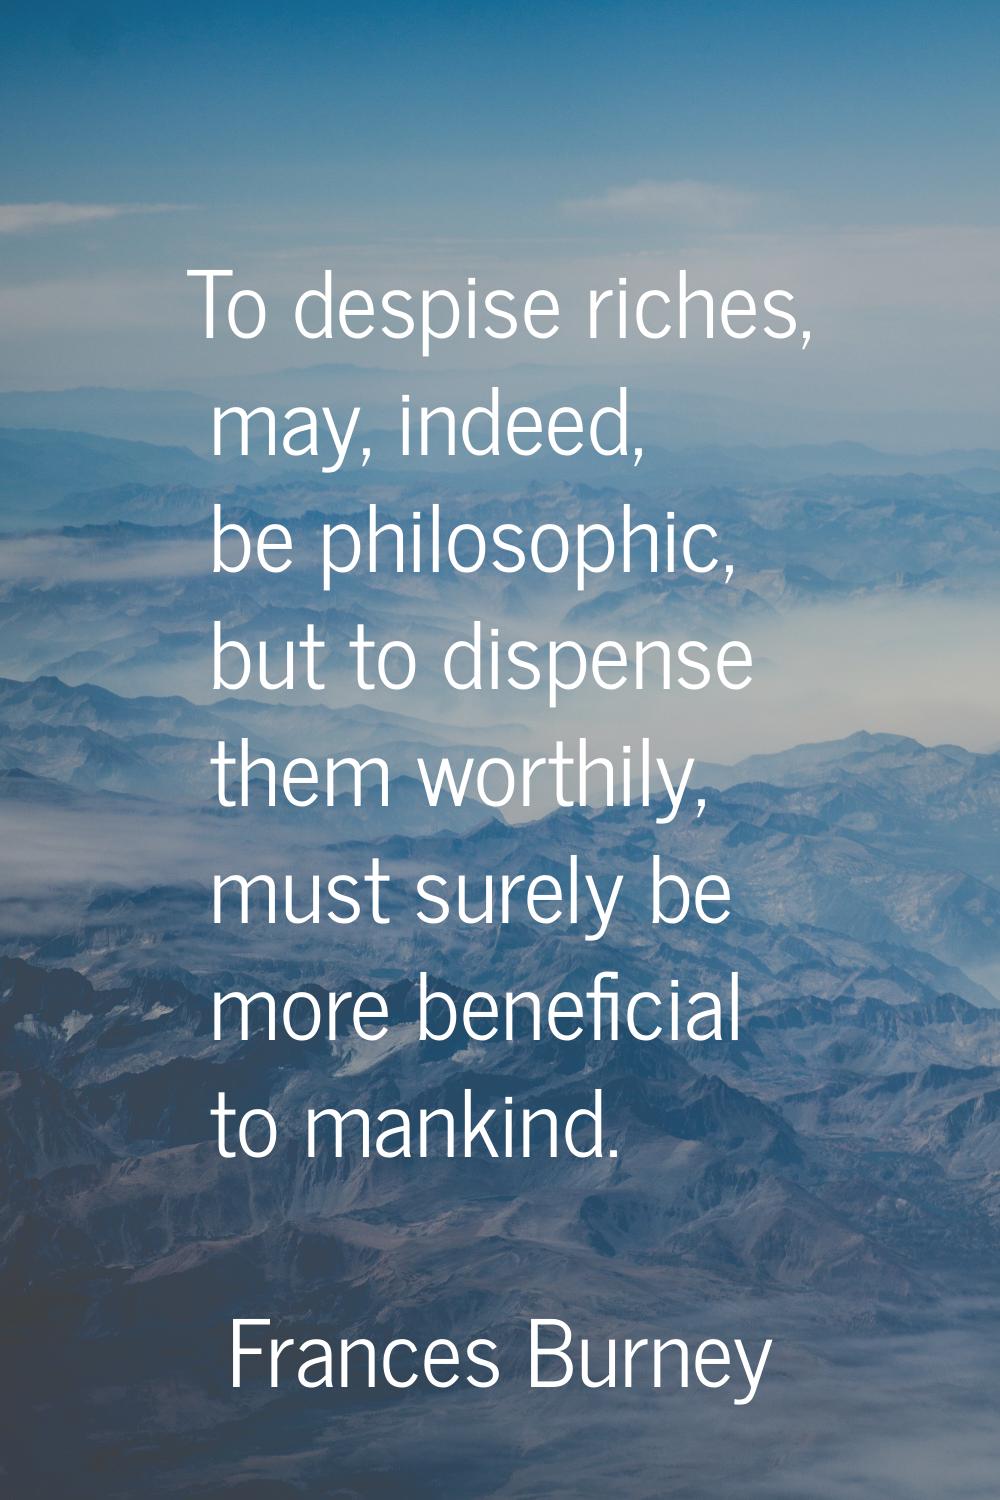 To despise riches, may, indeed, be philosophic, but to dispense them worthily, must surely be more 